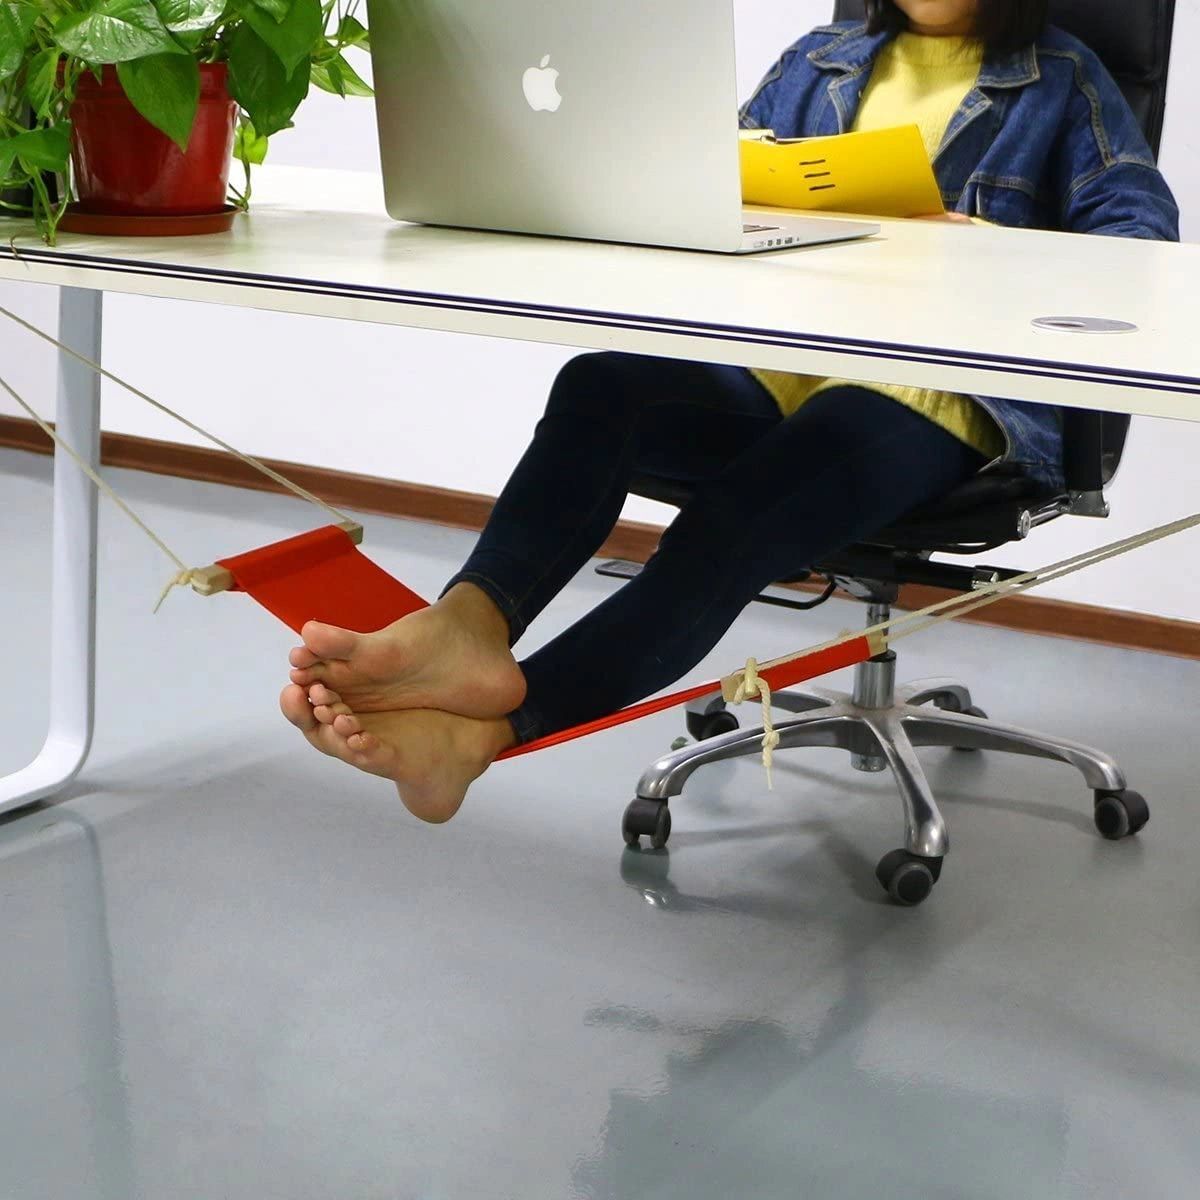 swing elevation foot feet rest holder chair desk office work home business ideas posture back pain